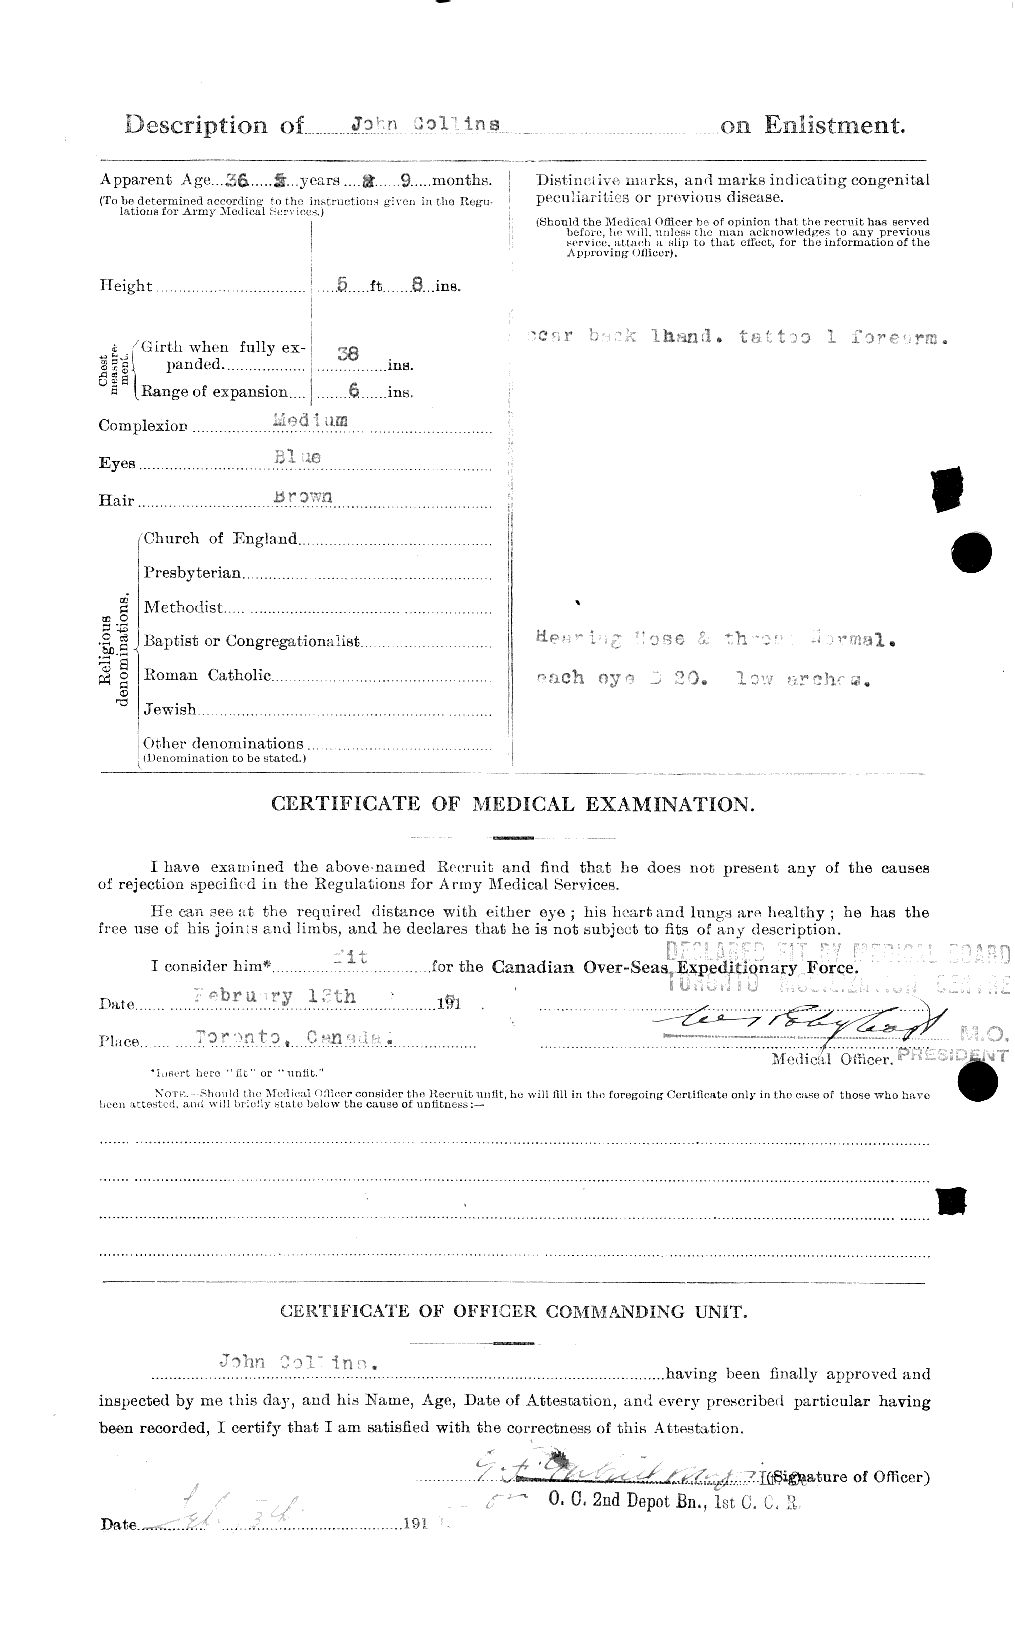 Personnel Records of the First World War - CEF 037996b